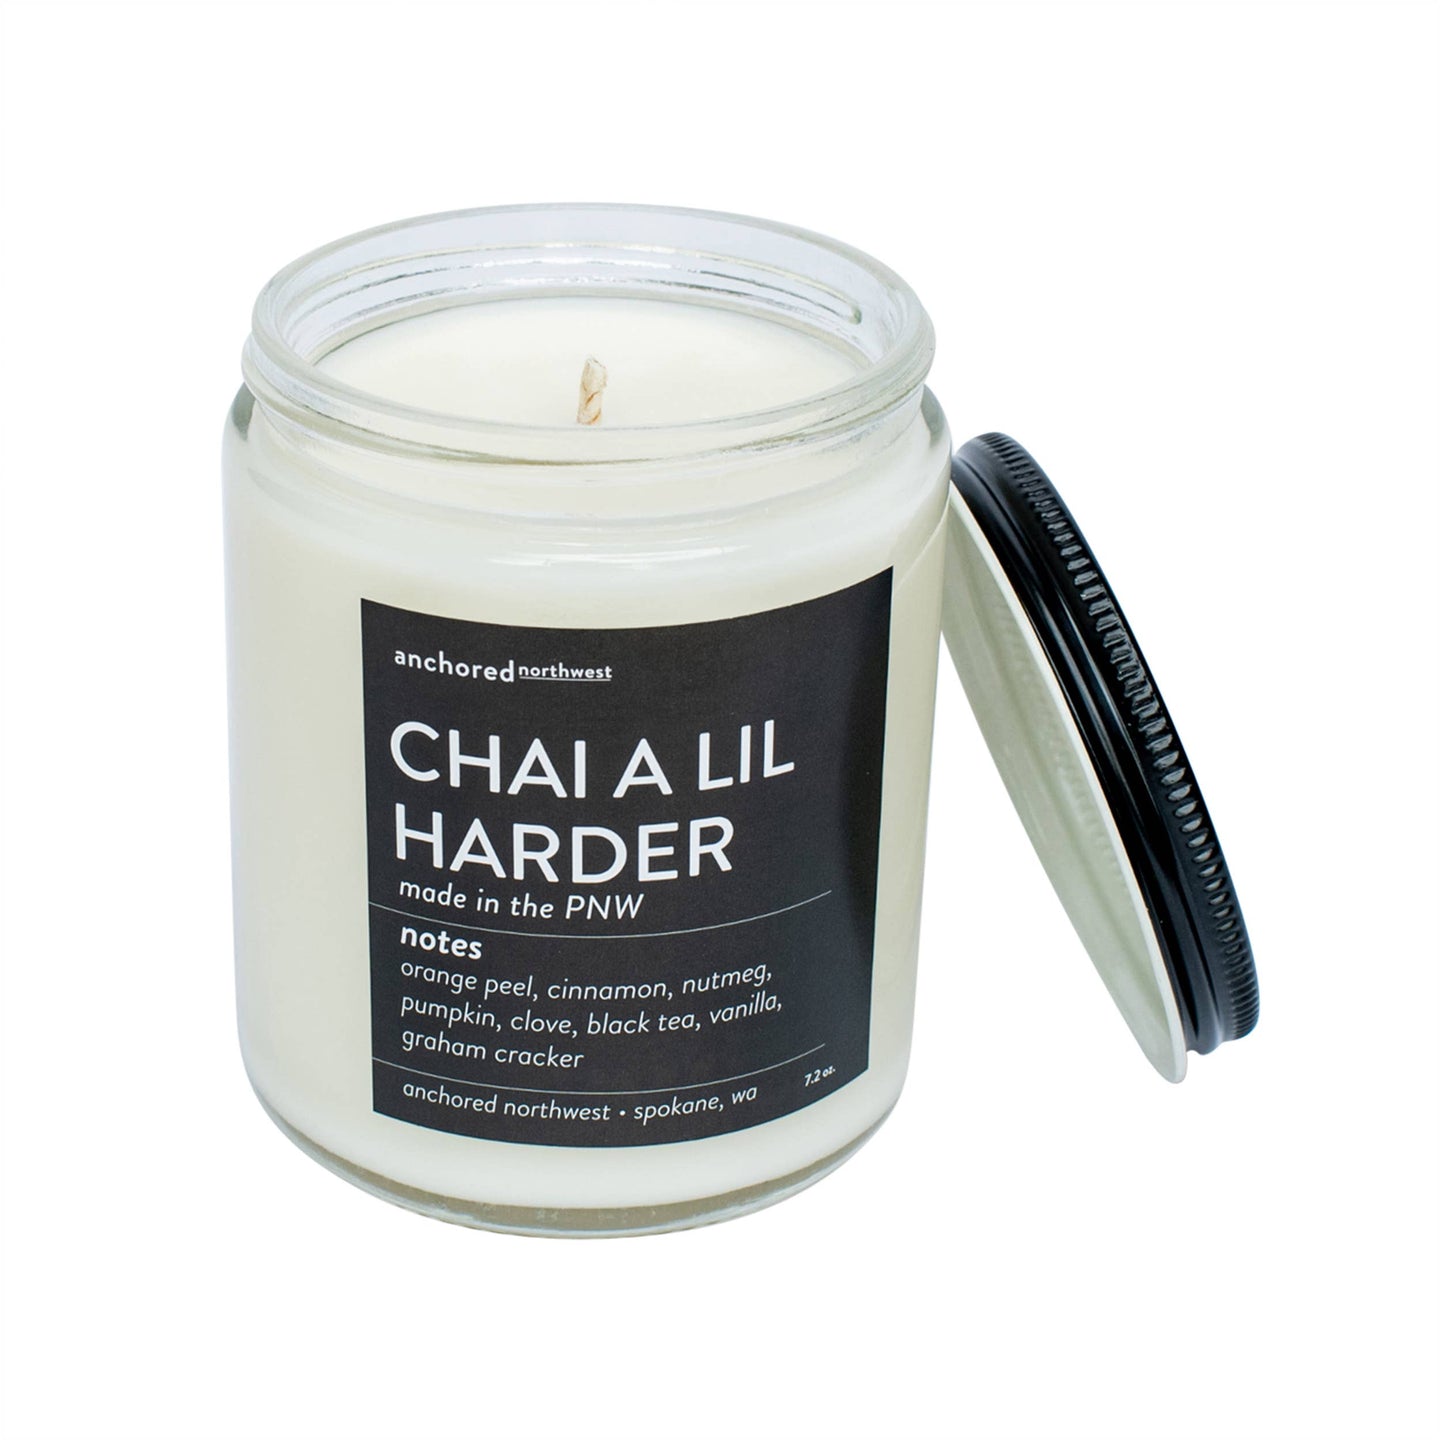 Chai a lil Harder Classic Tumbler Candle